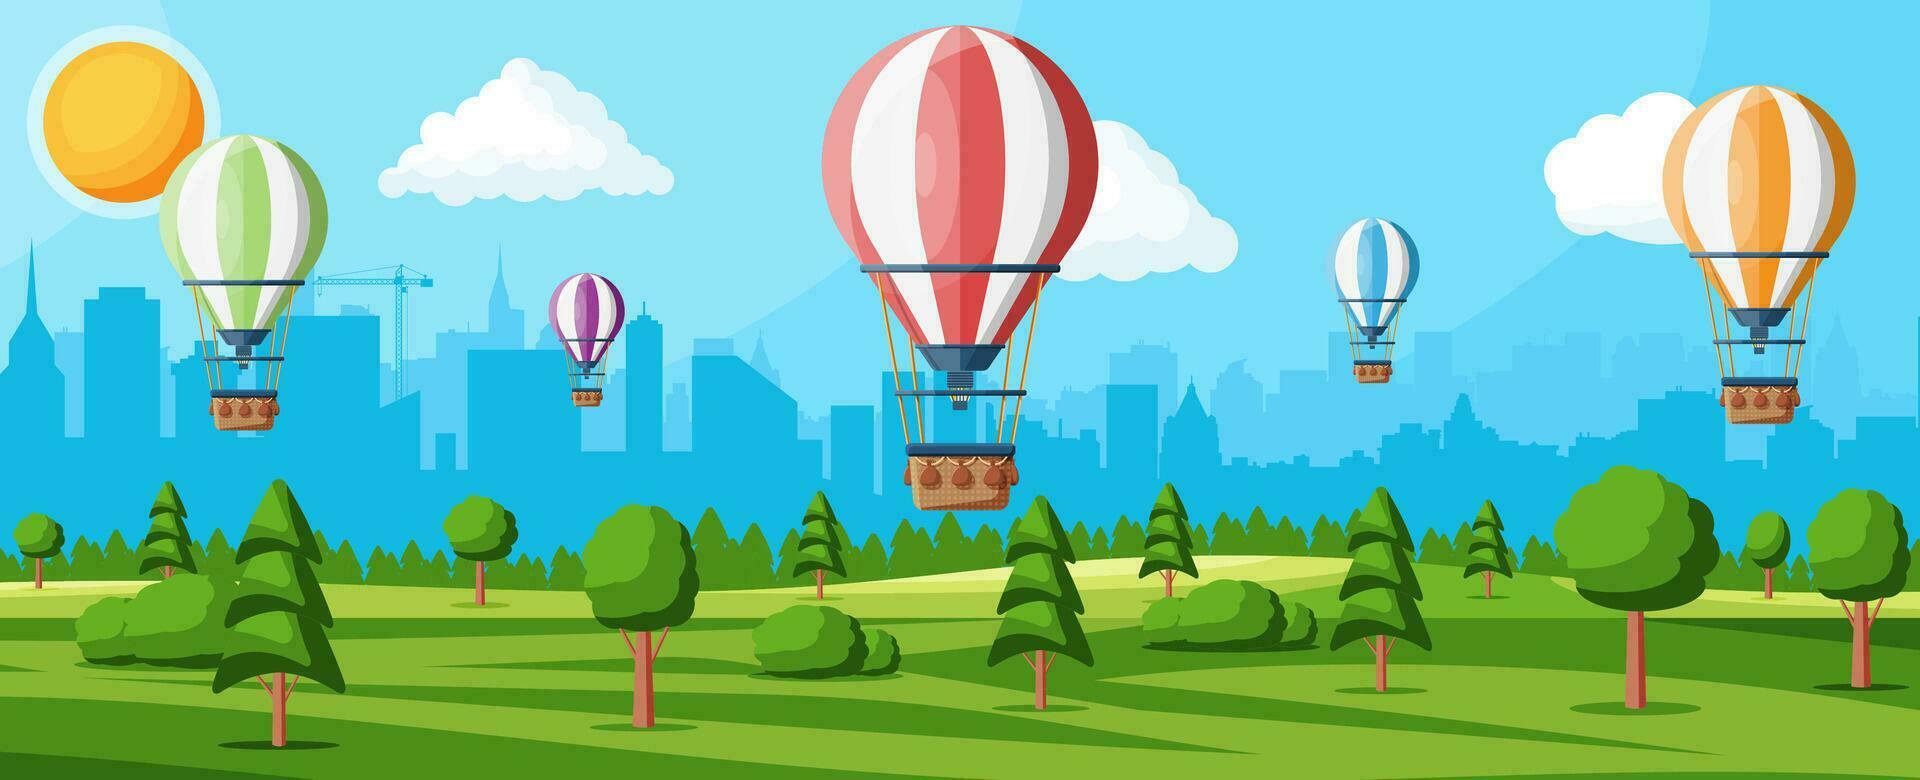 Hot Air Balloon In The Sky With Clouds and Sun. Vintage Air Transport. Nature Outdoor Background. Aerostat With Basket. Nature Landscape Of Green Hills And Cityscape. Flat Vector Illustration